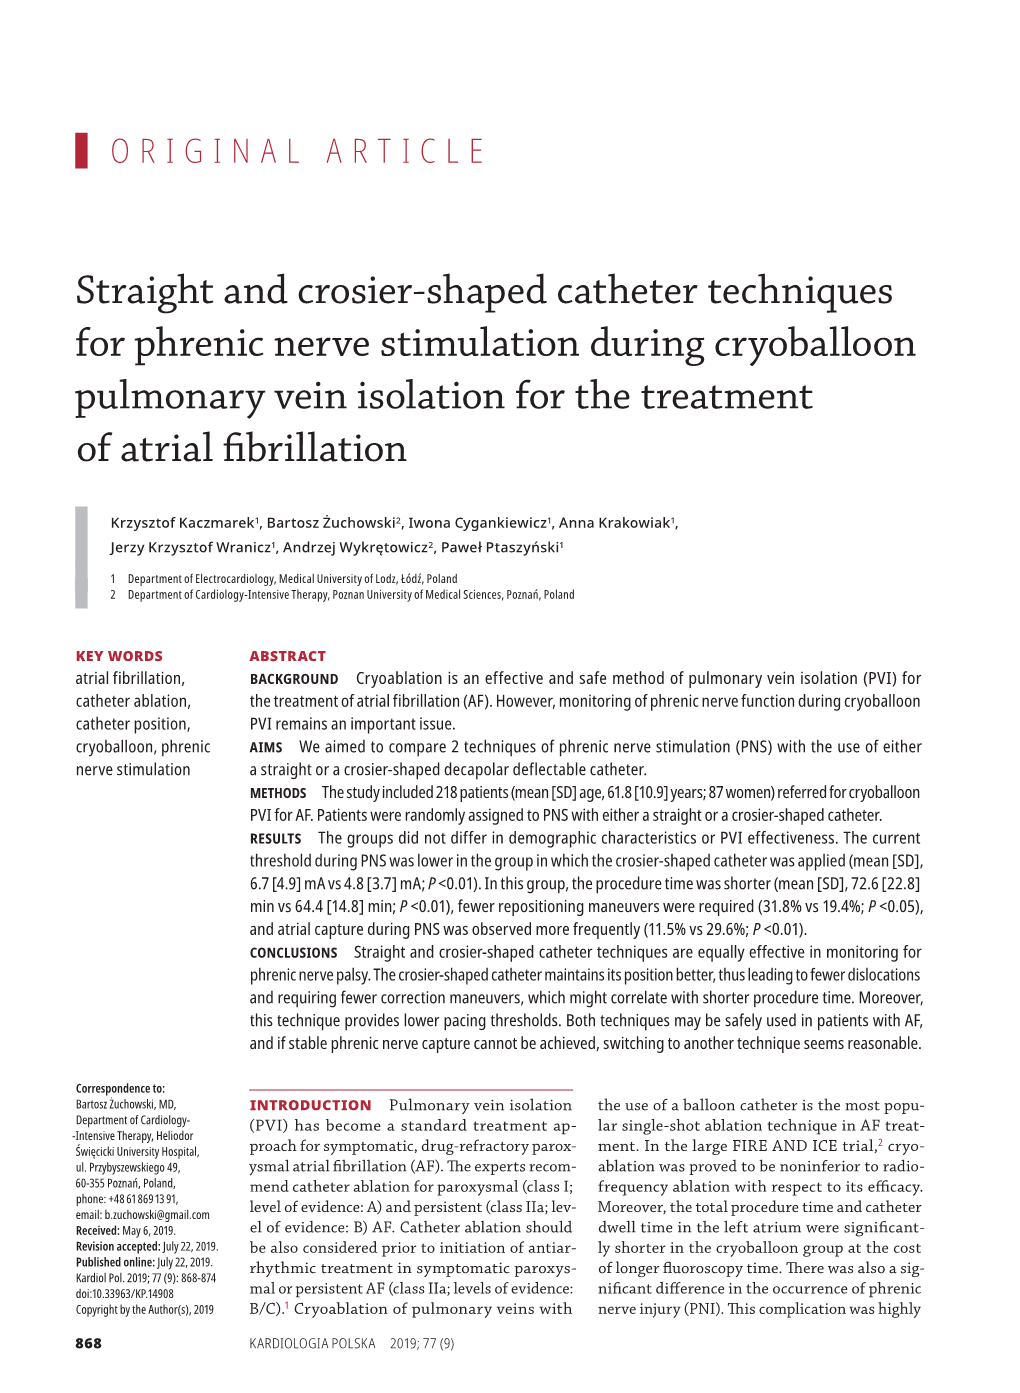 Shaped Catheter Techniques for Phrenic Nerve Stimulation During Cryoballoon Pulmonary Vein Isolation for the Treatment of Atrial Fibrillation